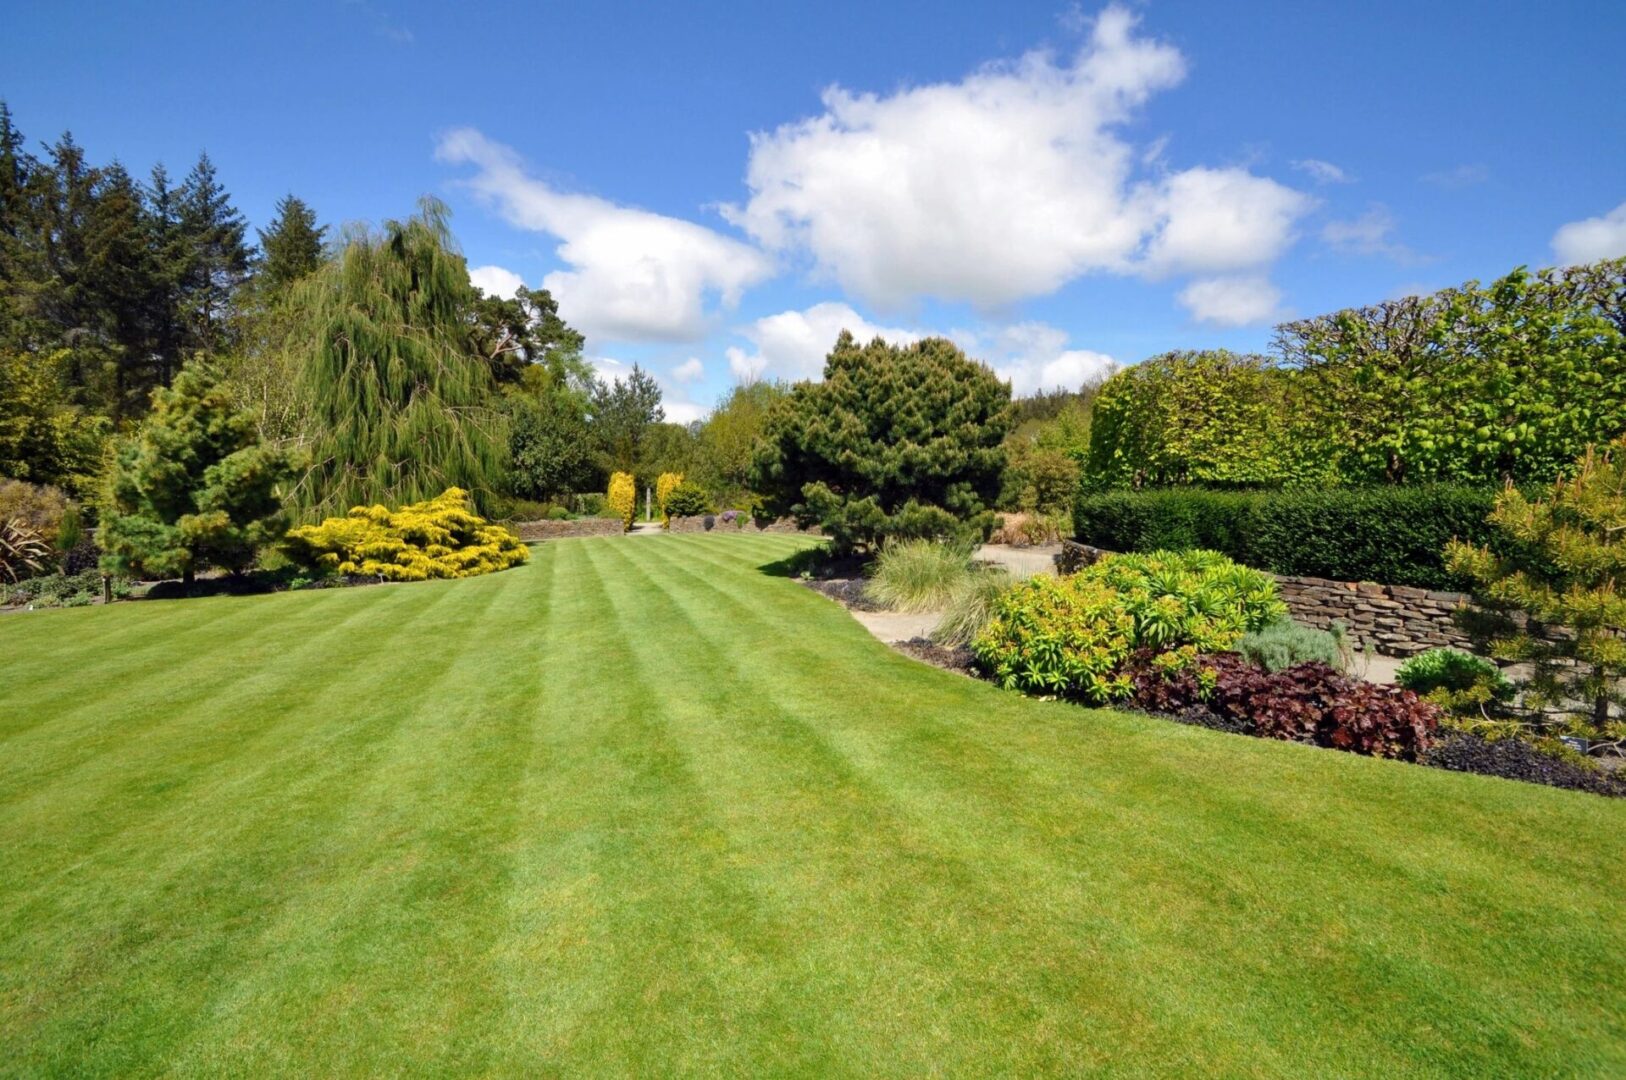 A lush, well-manicured lawn